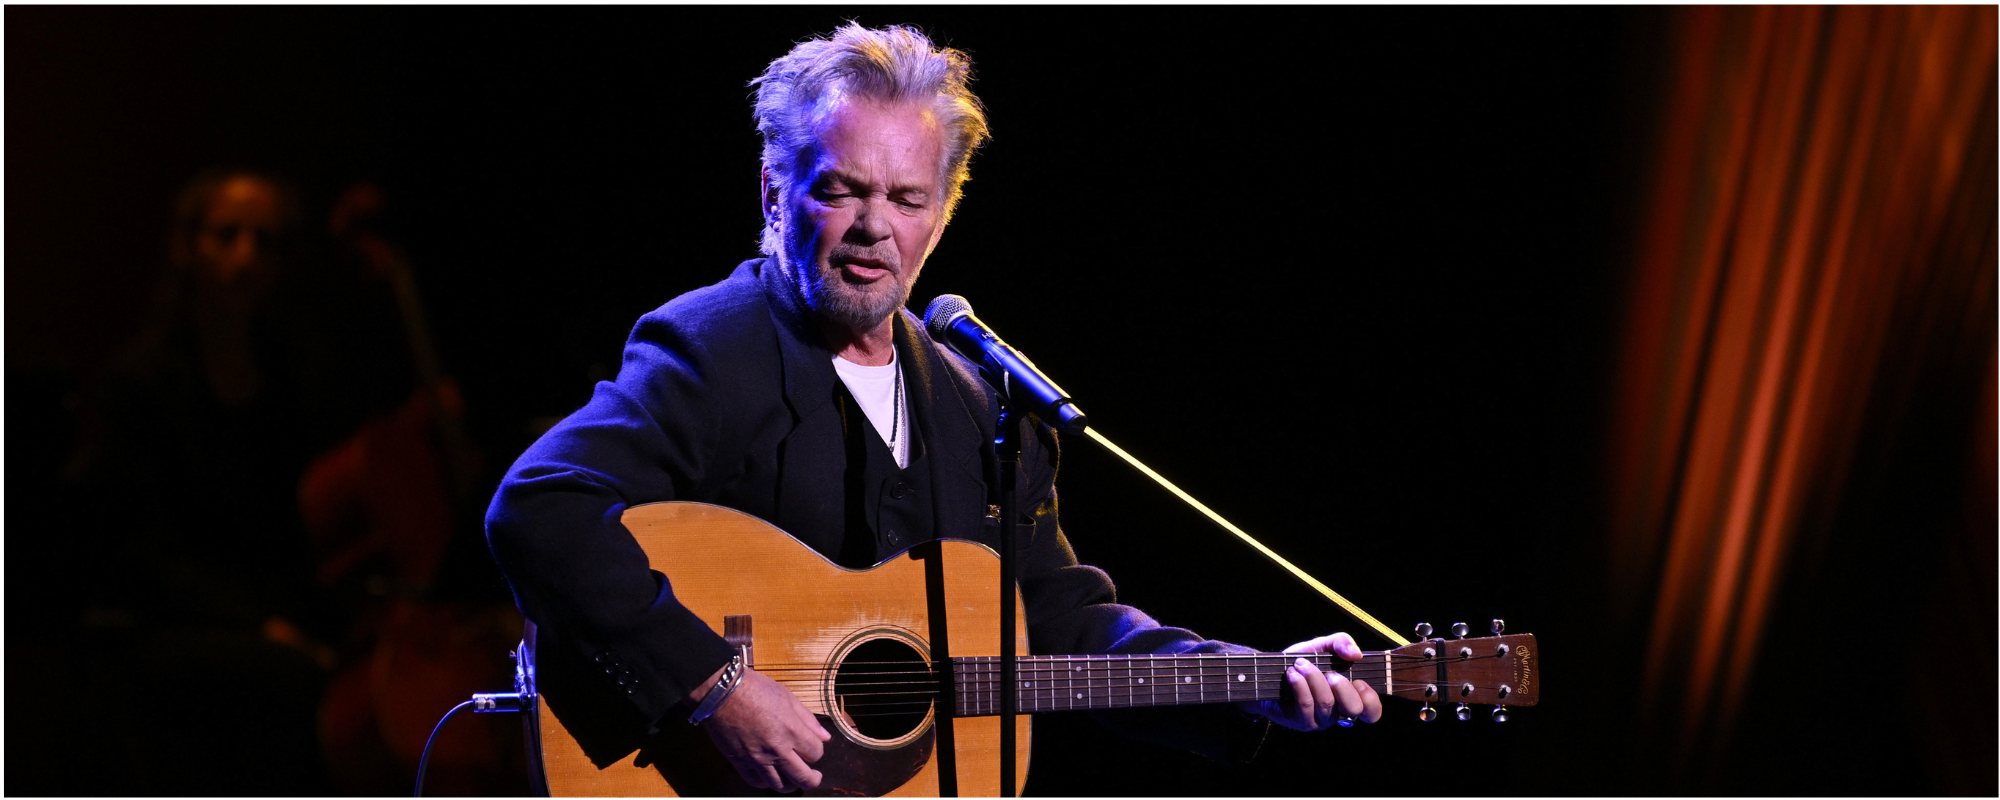 John Mellencamp Calls for More Graphic Depictions of Gun Violence in Media: “Show the Carnage on the News”